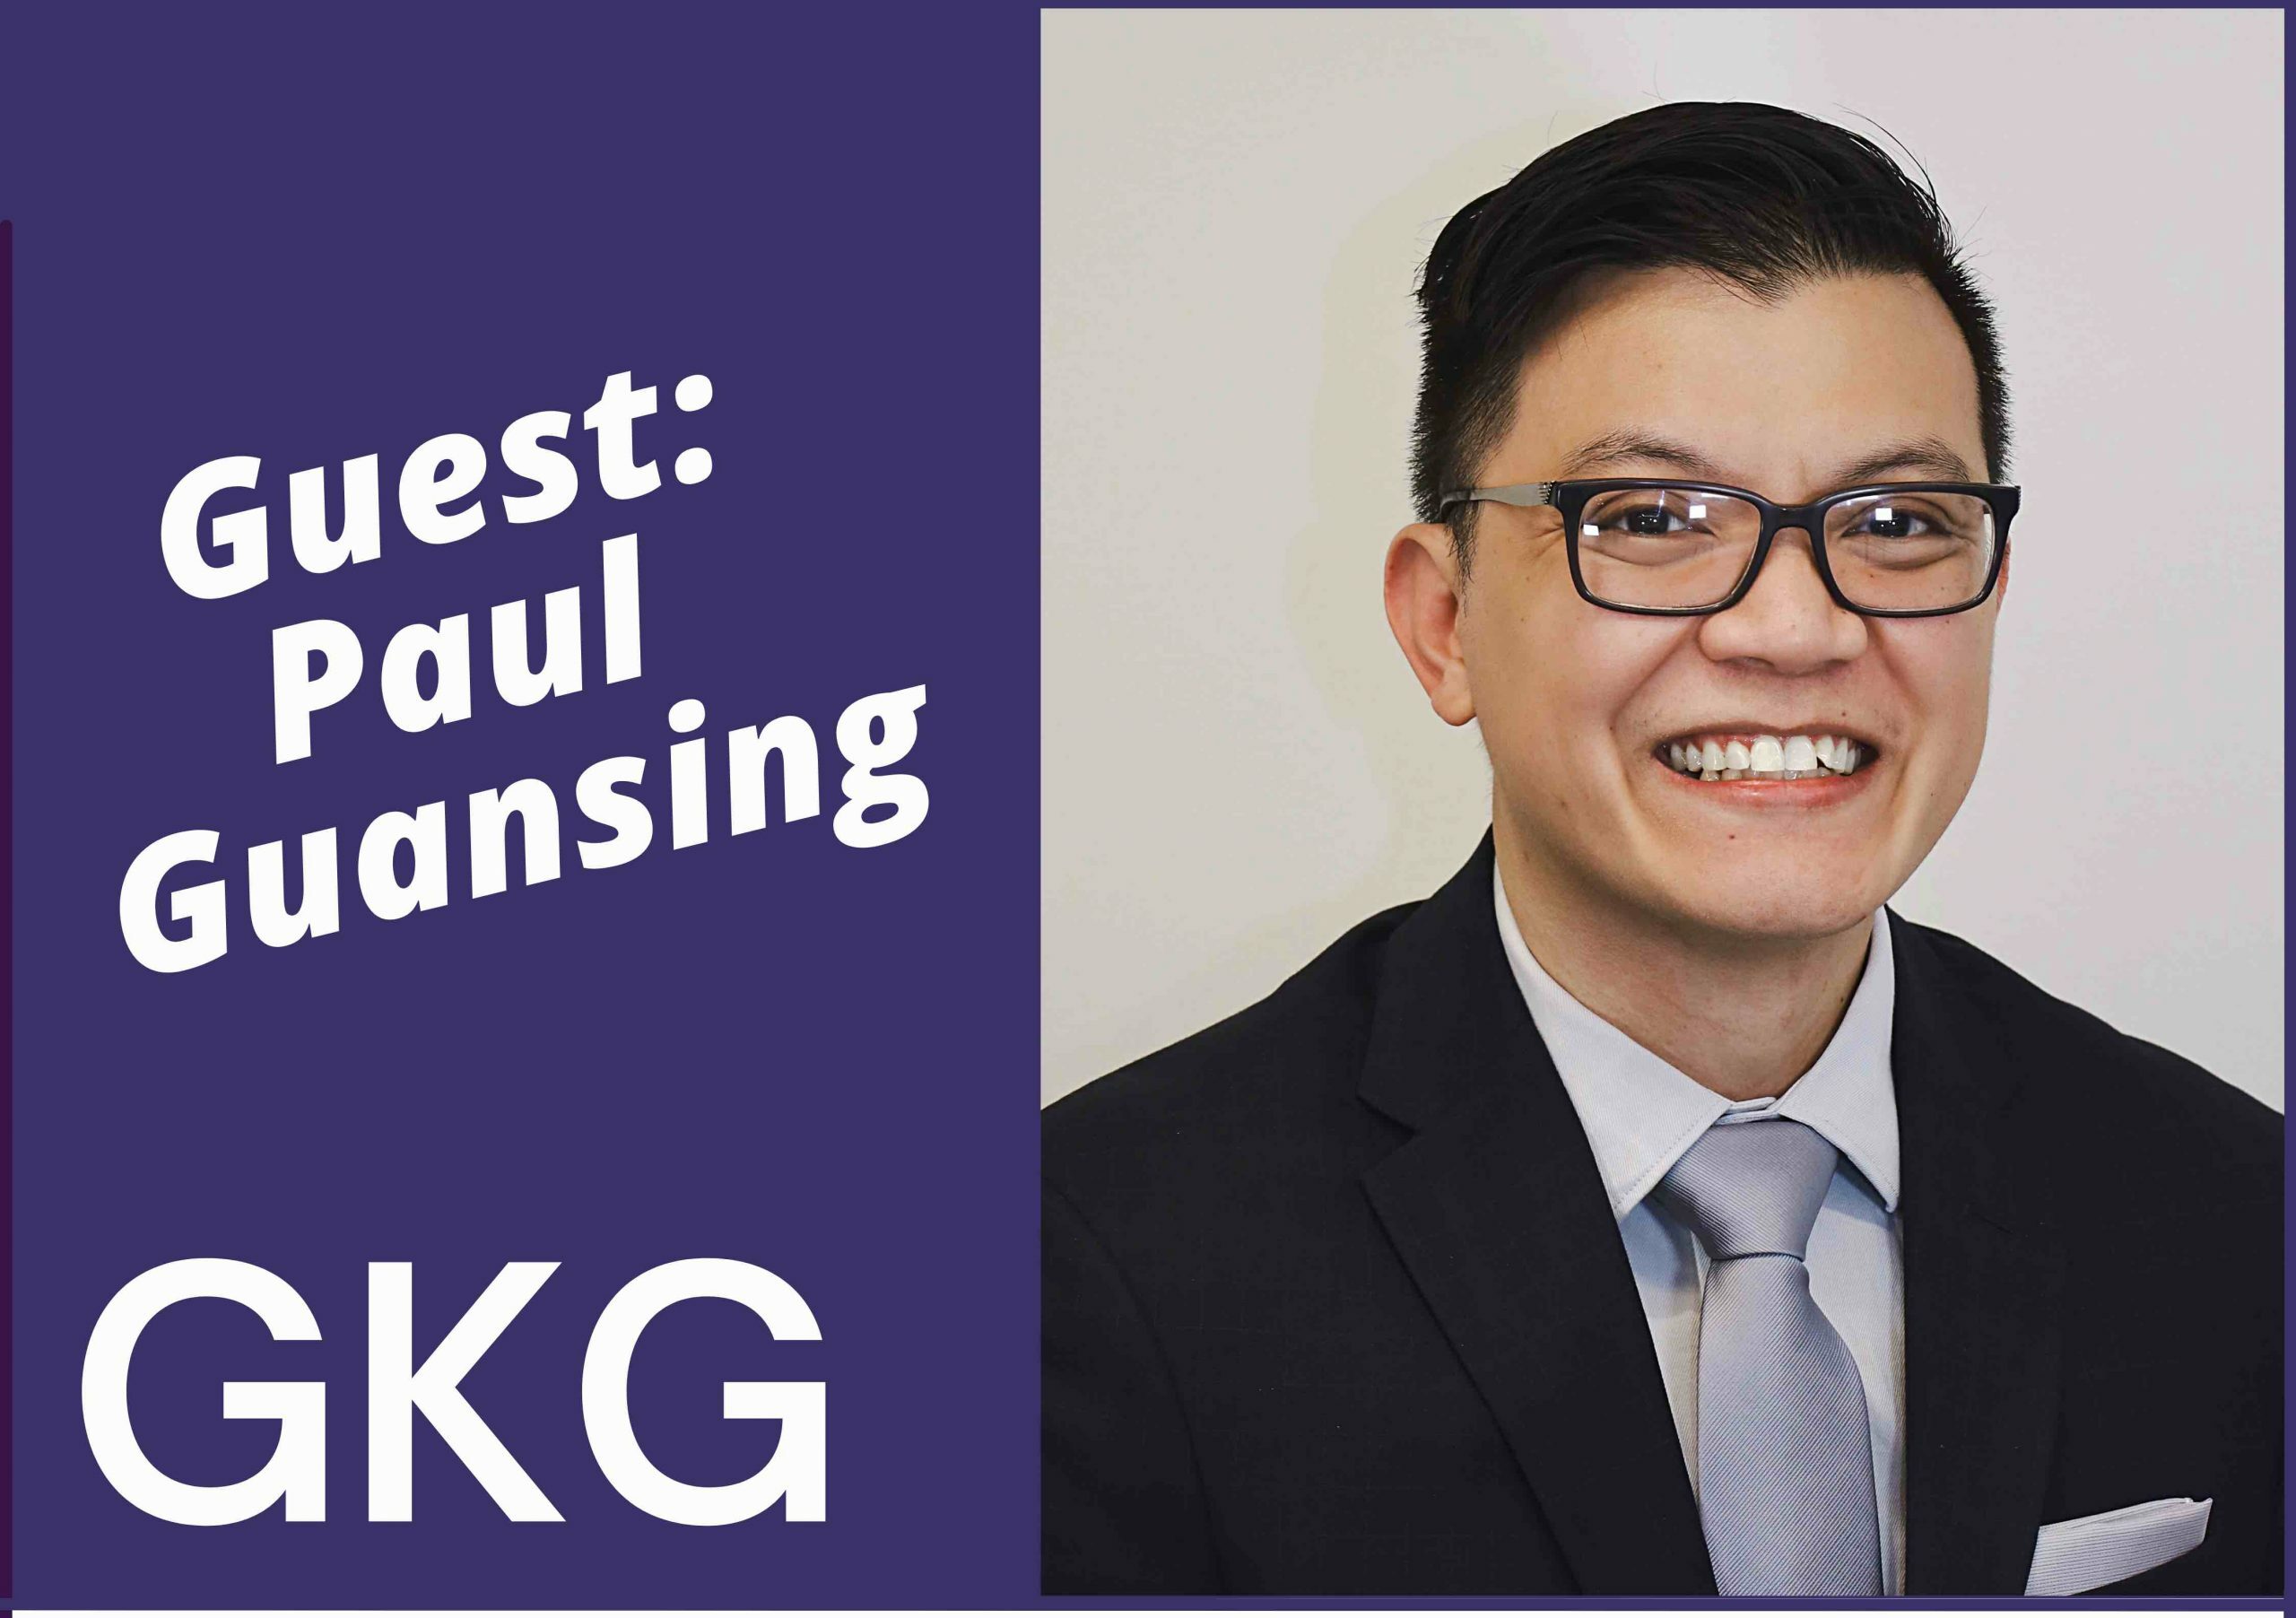 Promotional image featuring a smiling man in a suit with text introducing him as guest Paul Guansing, an expert in Human Resources, for GKG.